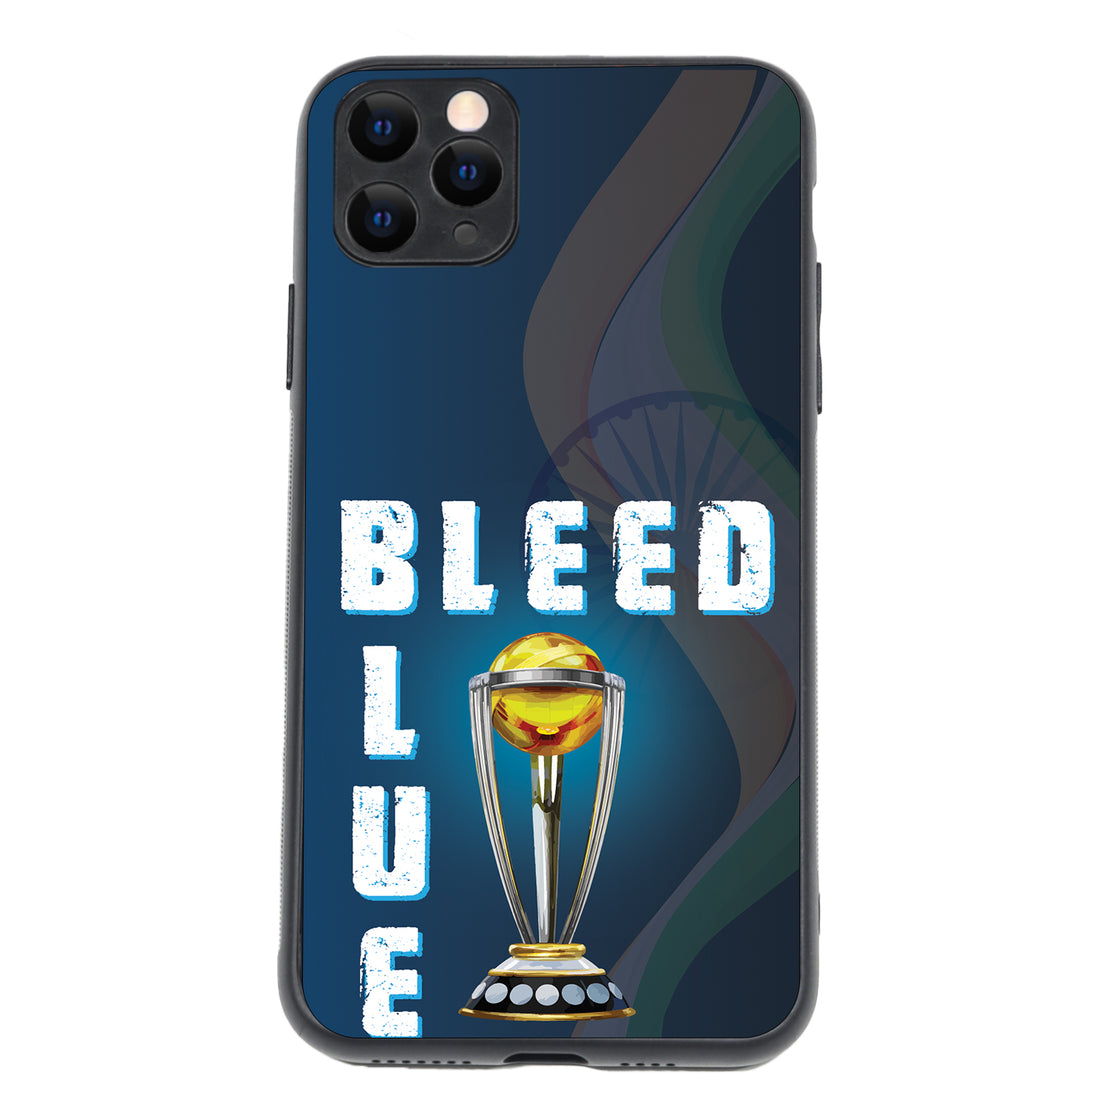 Bleed Blue Sports iPhone 11 Pro Max Case